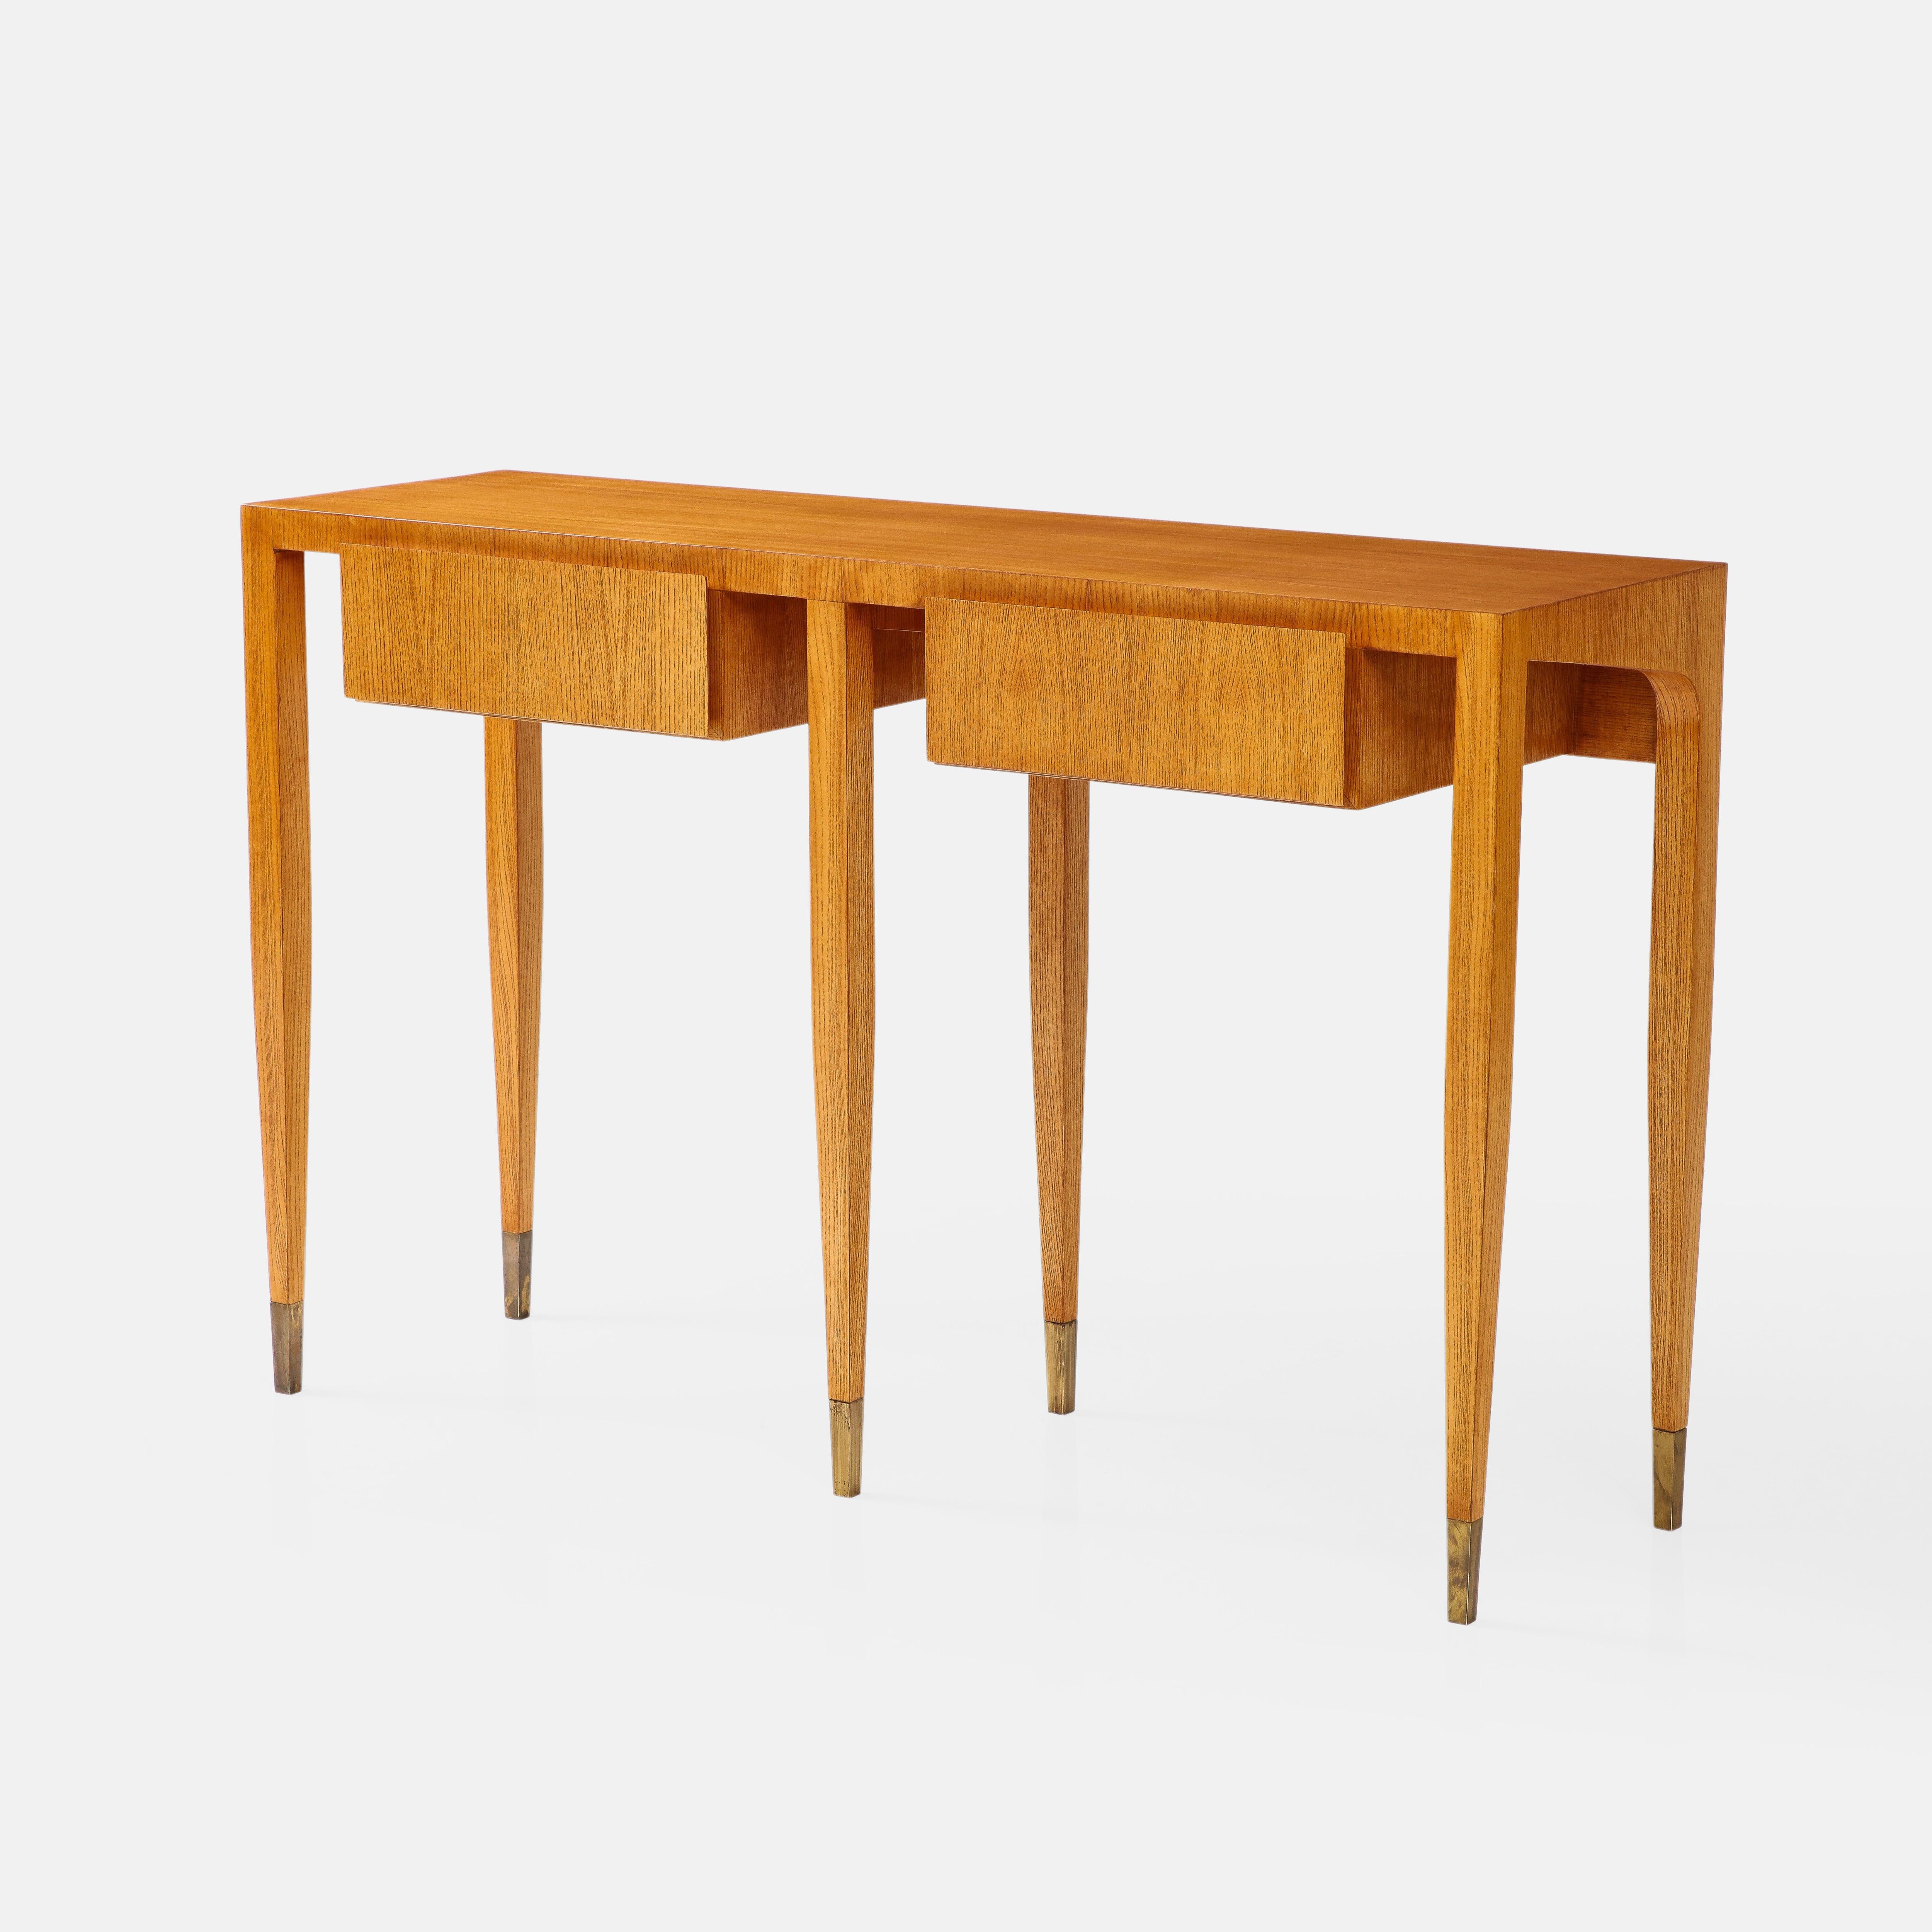 Italian Gio Ponti for Giordano Chiesa Rare Pair of Ash Wood Consoles, Italy, 1950s For Sale